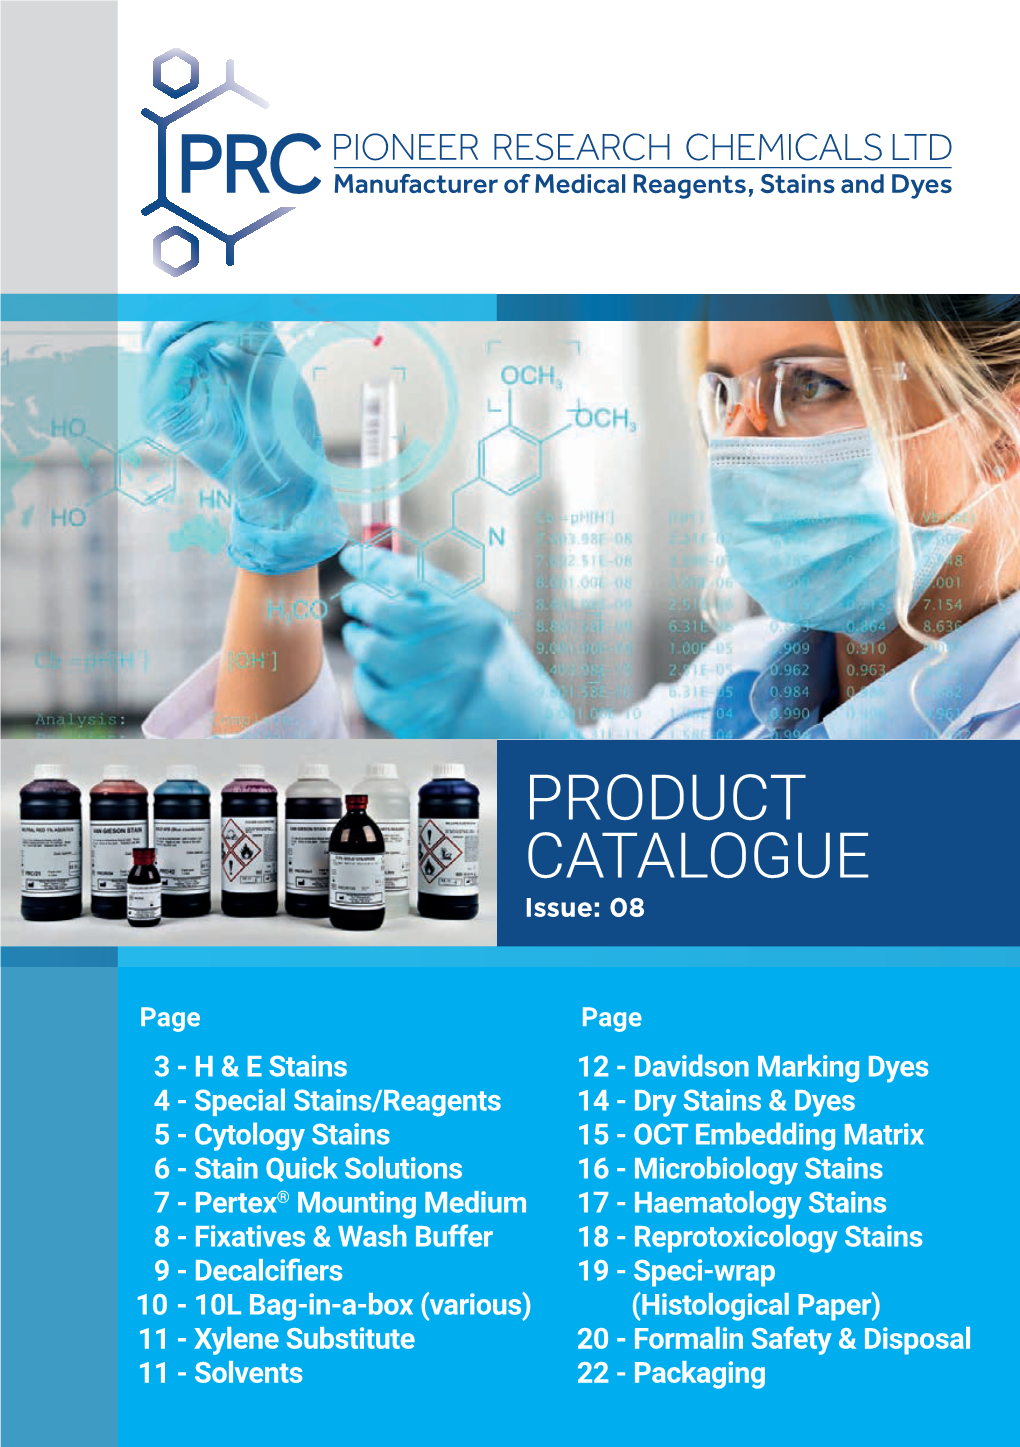 PRODUCT CATALOGUE Issue: 08